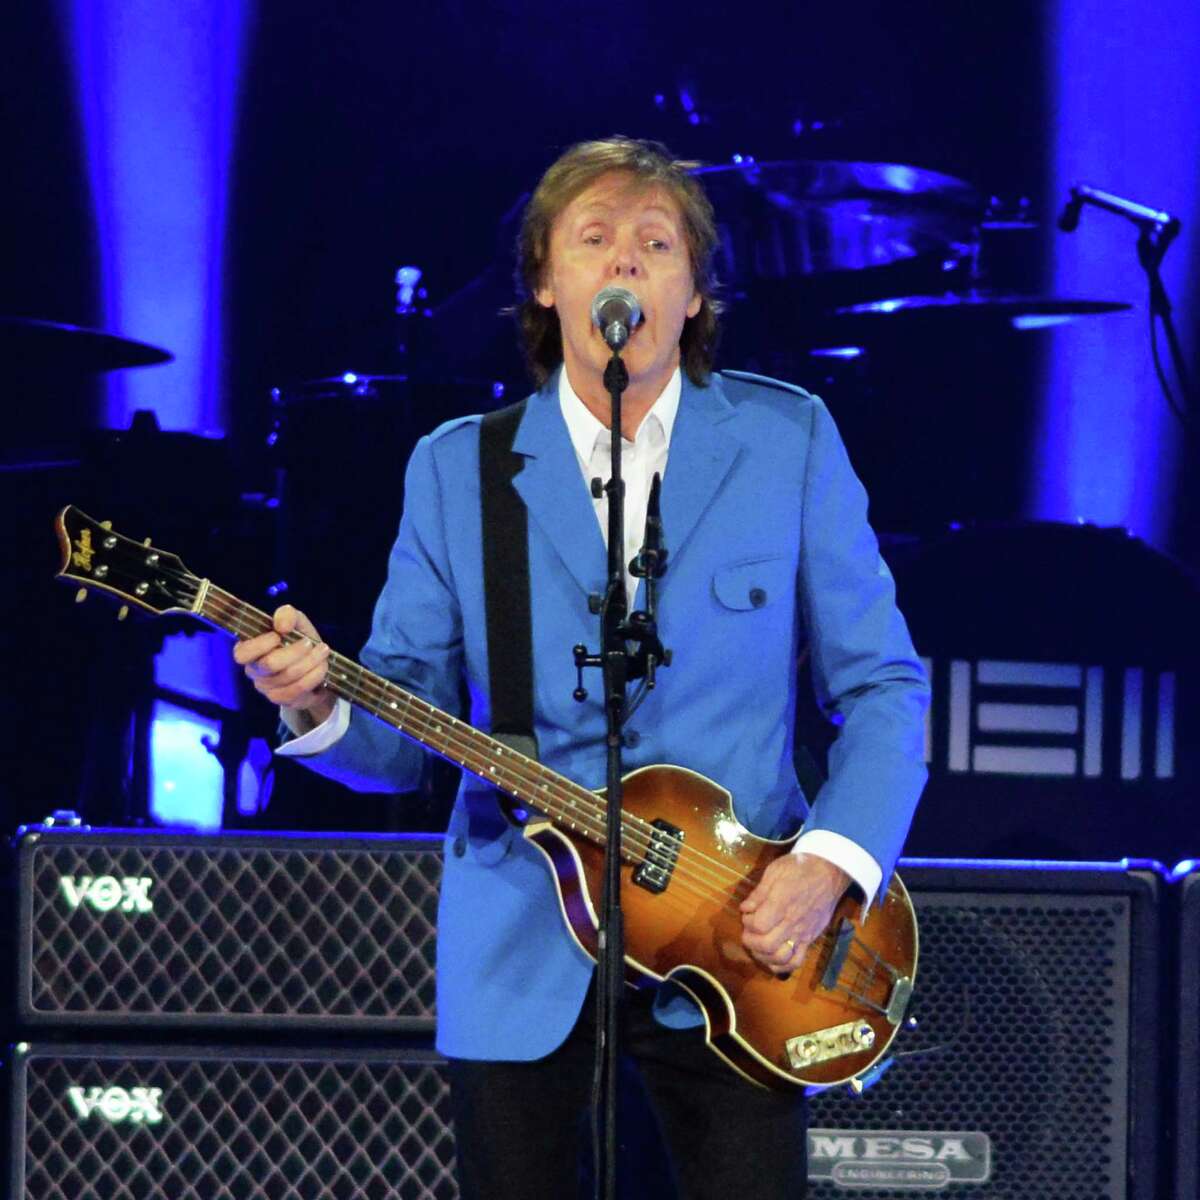 Paul McCartney performs at the Times Union Center Saturday July 5, 2014, in Albany, NY. (John Carl D'Annibale / Times Union)